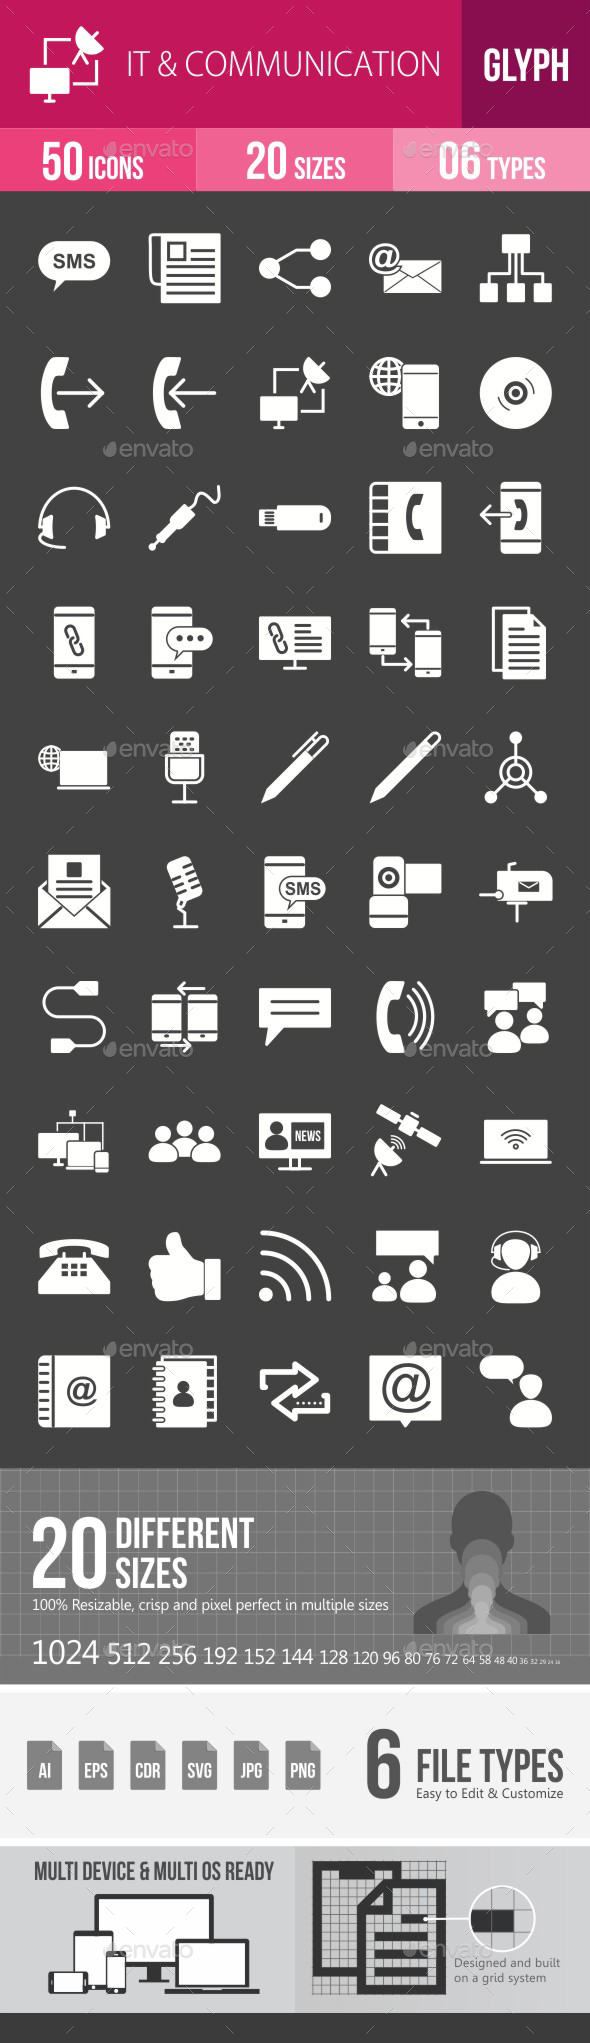 IT & Communication Glyph Inverted Icons